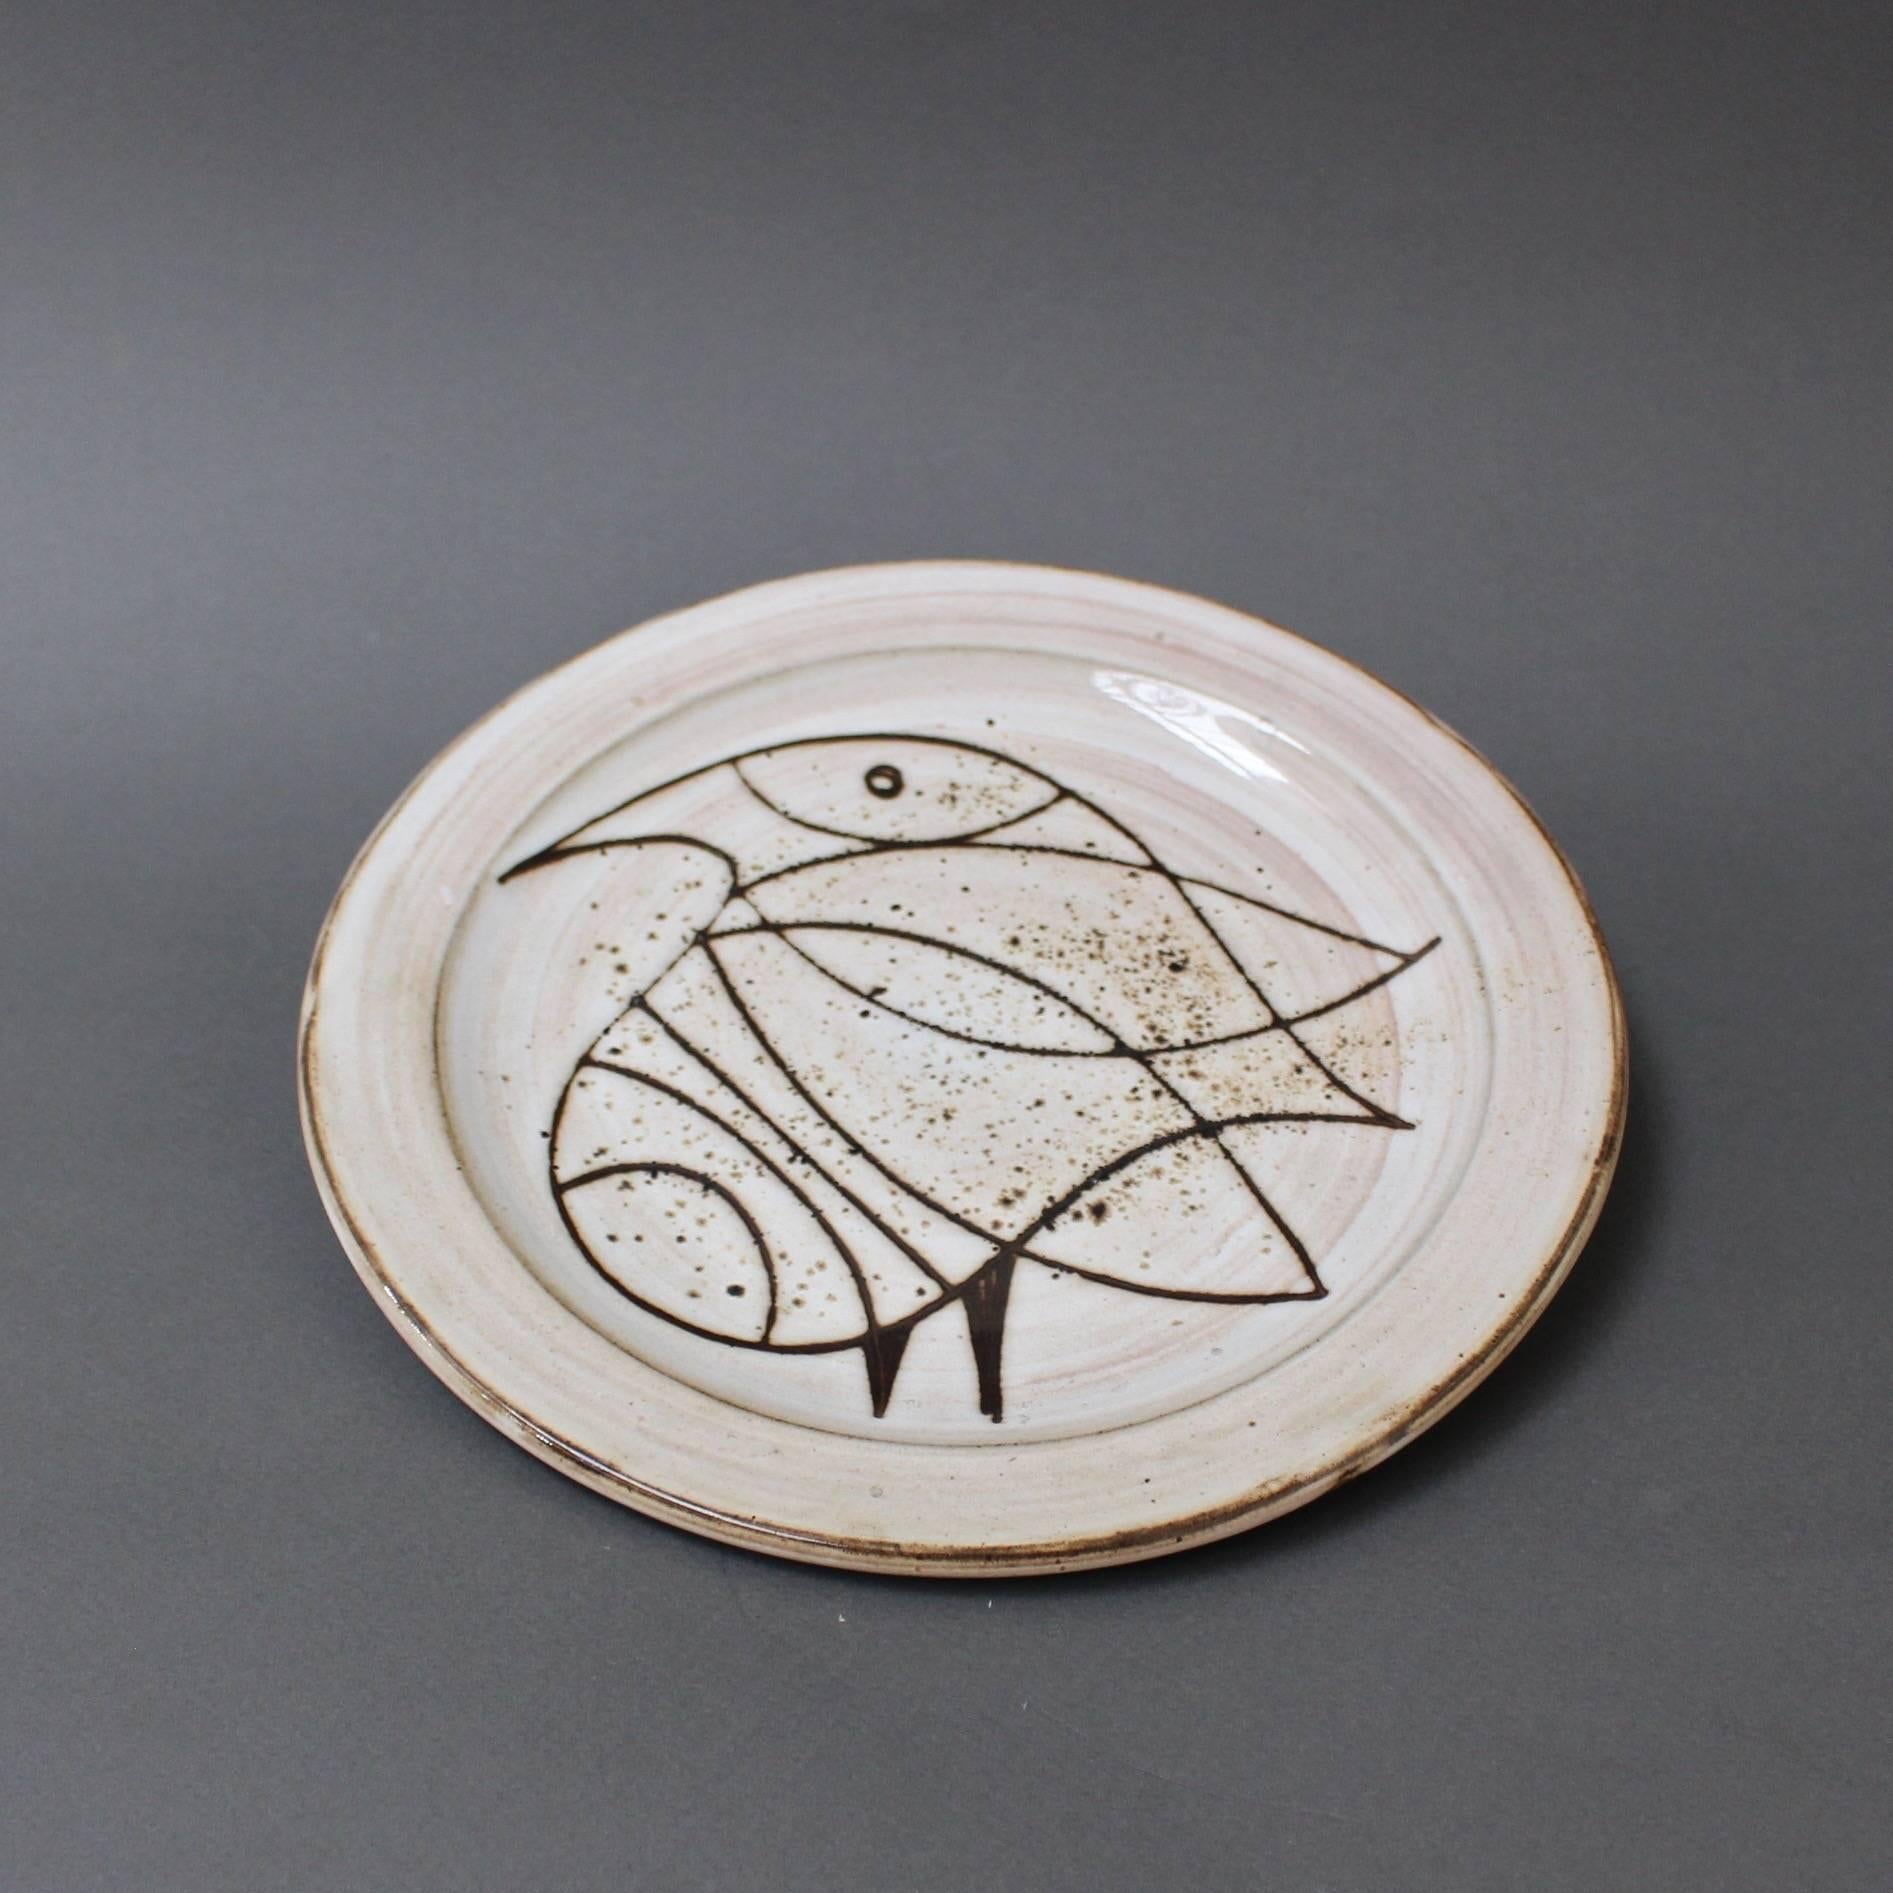 This plate (circa 1950s) with large stylised bird, perhaps a lovely dove, is a more personal piece by Pouchain. Pouchain's trademark hazy beige glaze contrasts with the darker brown from the etched bird in the centre of the plate and the outer edge.